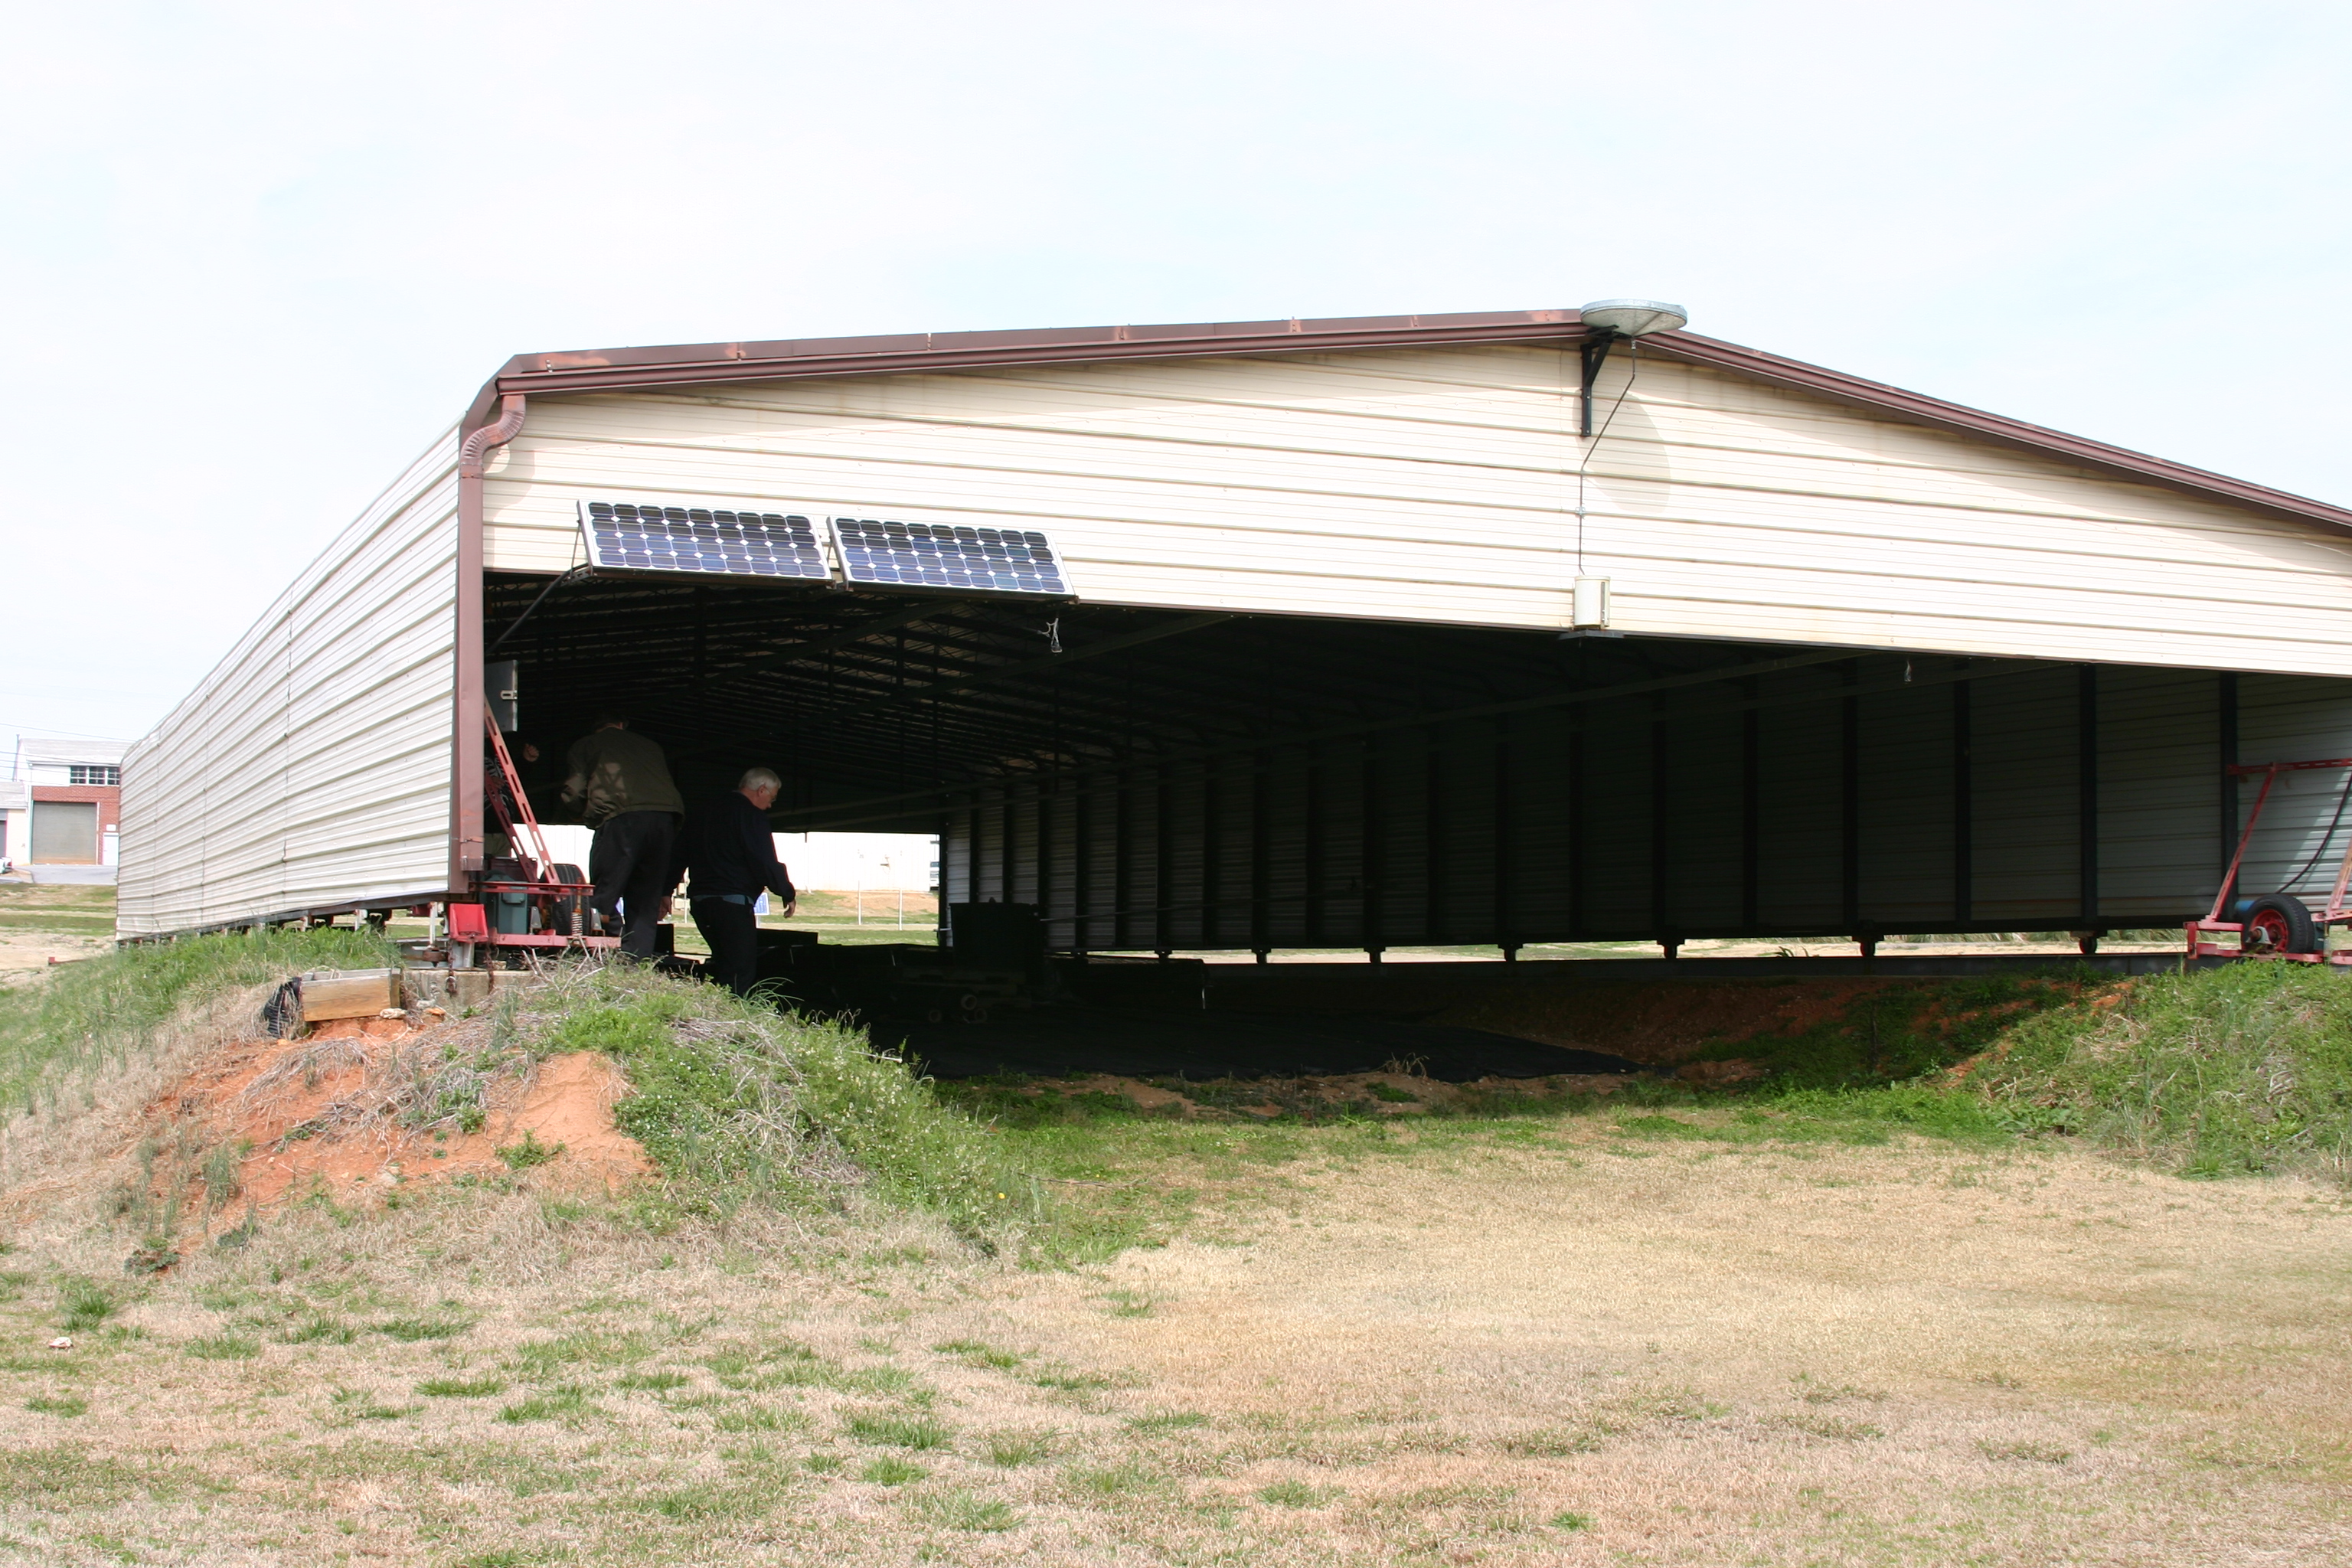 Images showcasing the structure and design of the large rainout shelter created by University of Georgia.